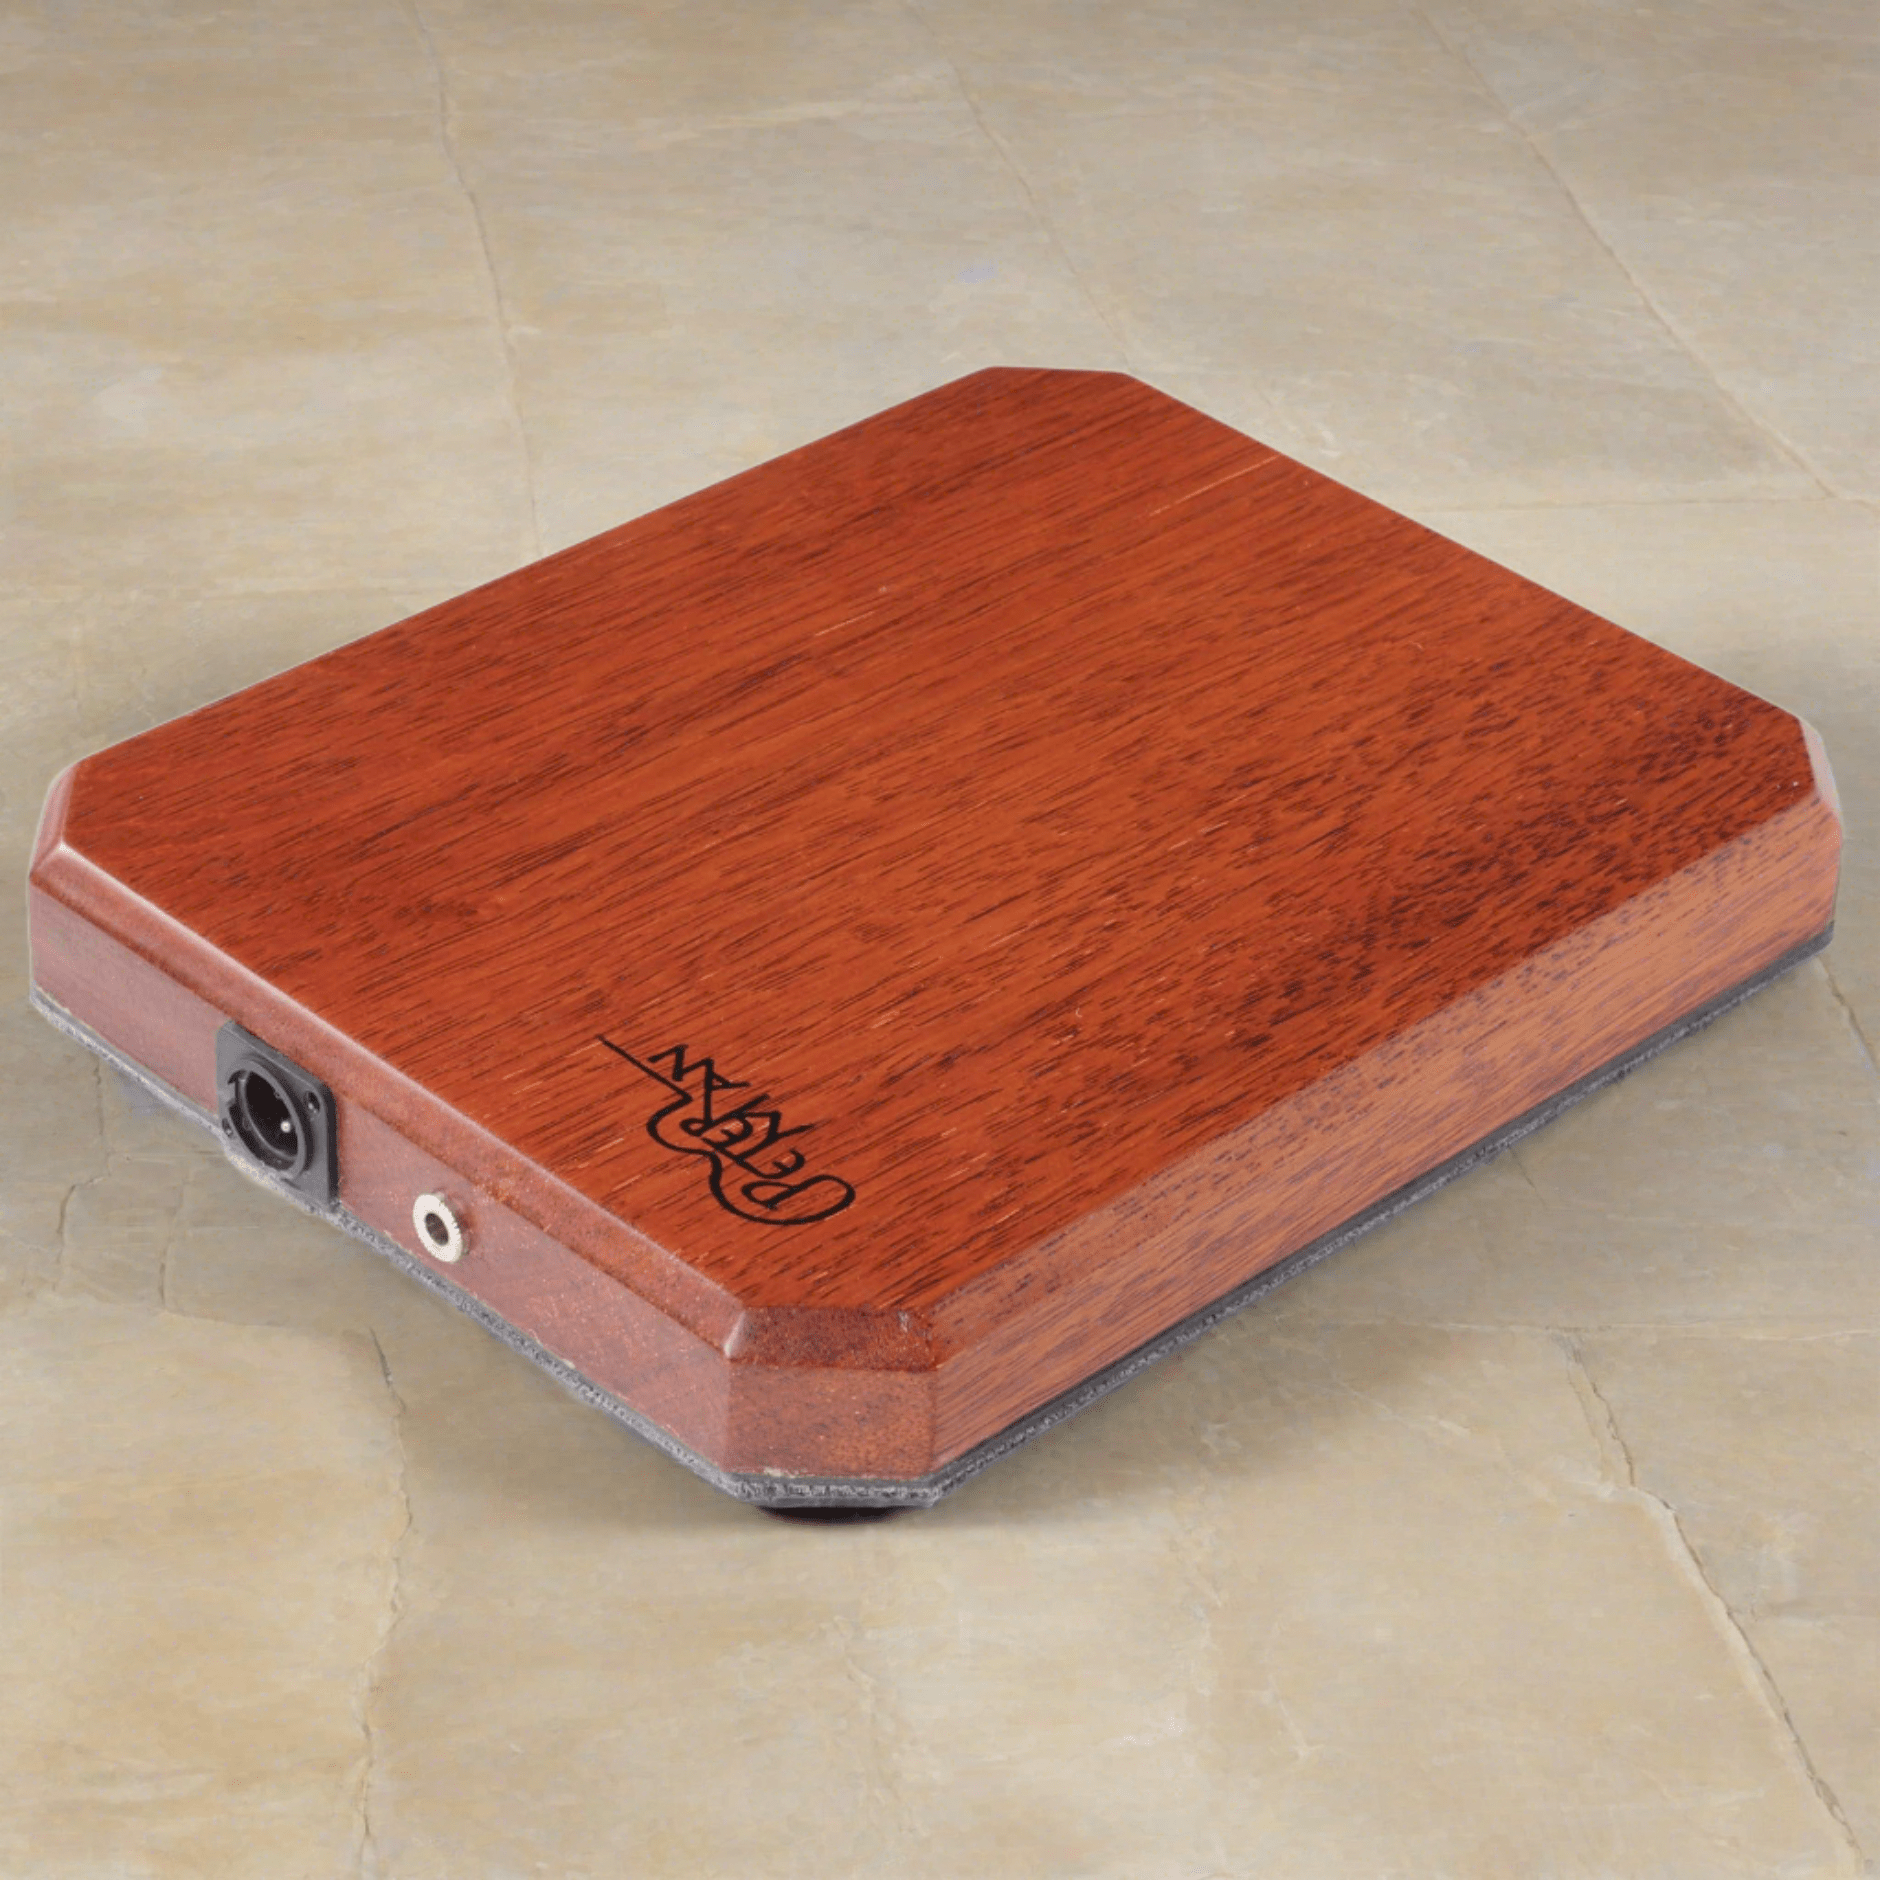 Big stomp professional stomp box with bass sound - Peterman Acoustic Music Stompbox